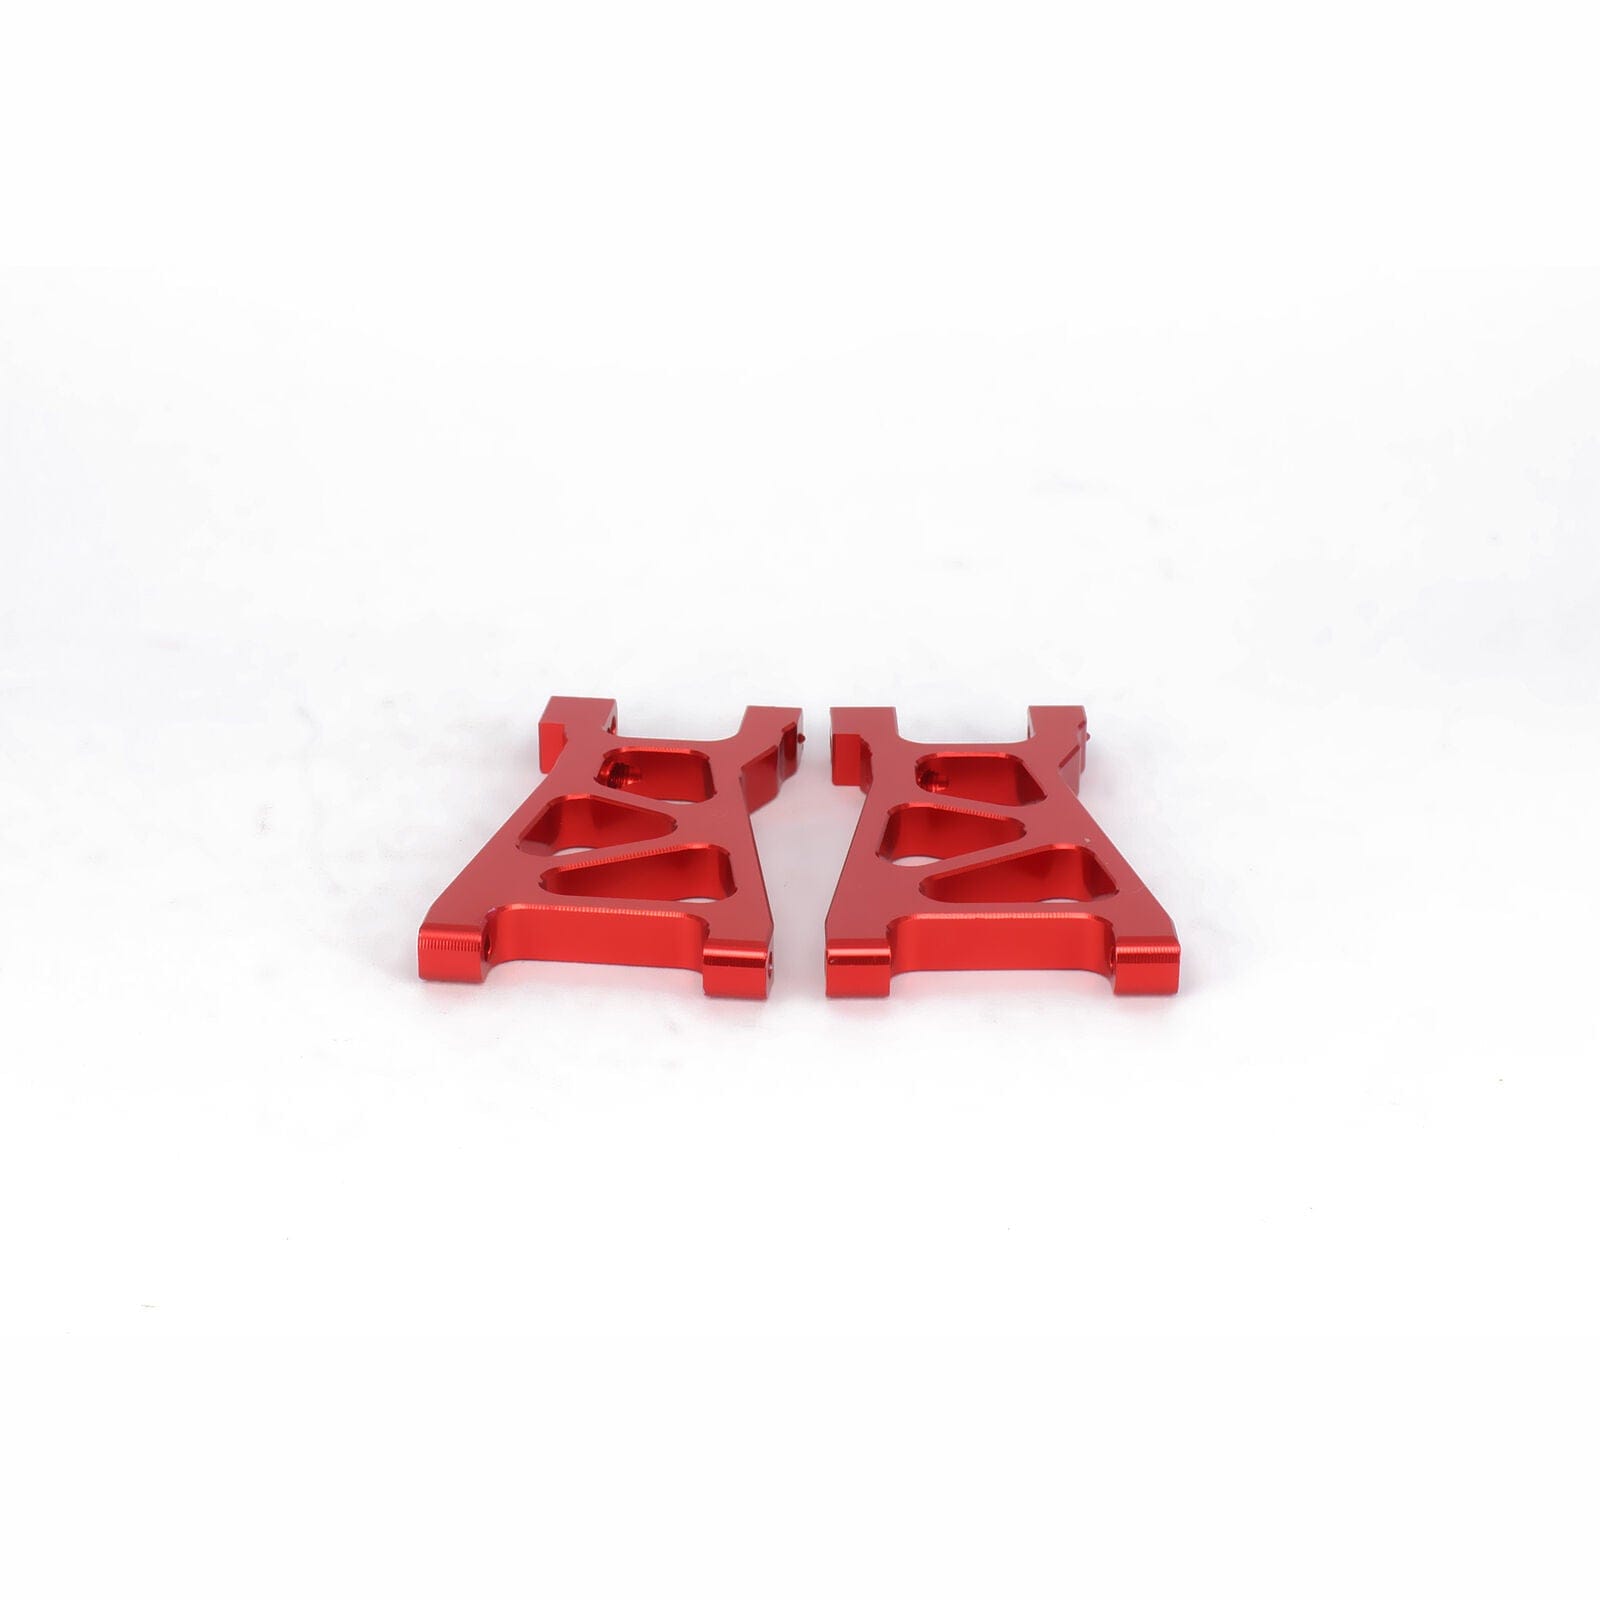 RCAWD HIMOTO UPGRADE PARTS Red RCAWD Alloy Rear Lower Suspension Arm M606 23606 For RC Car 1/18 Himoto E18 2pcs